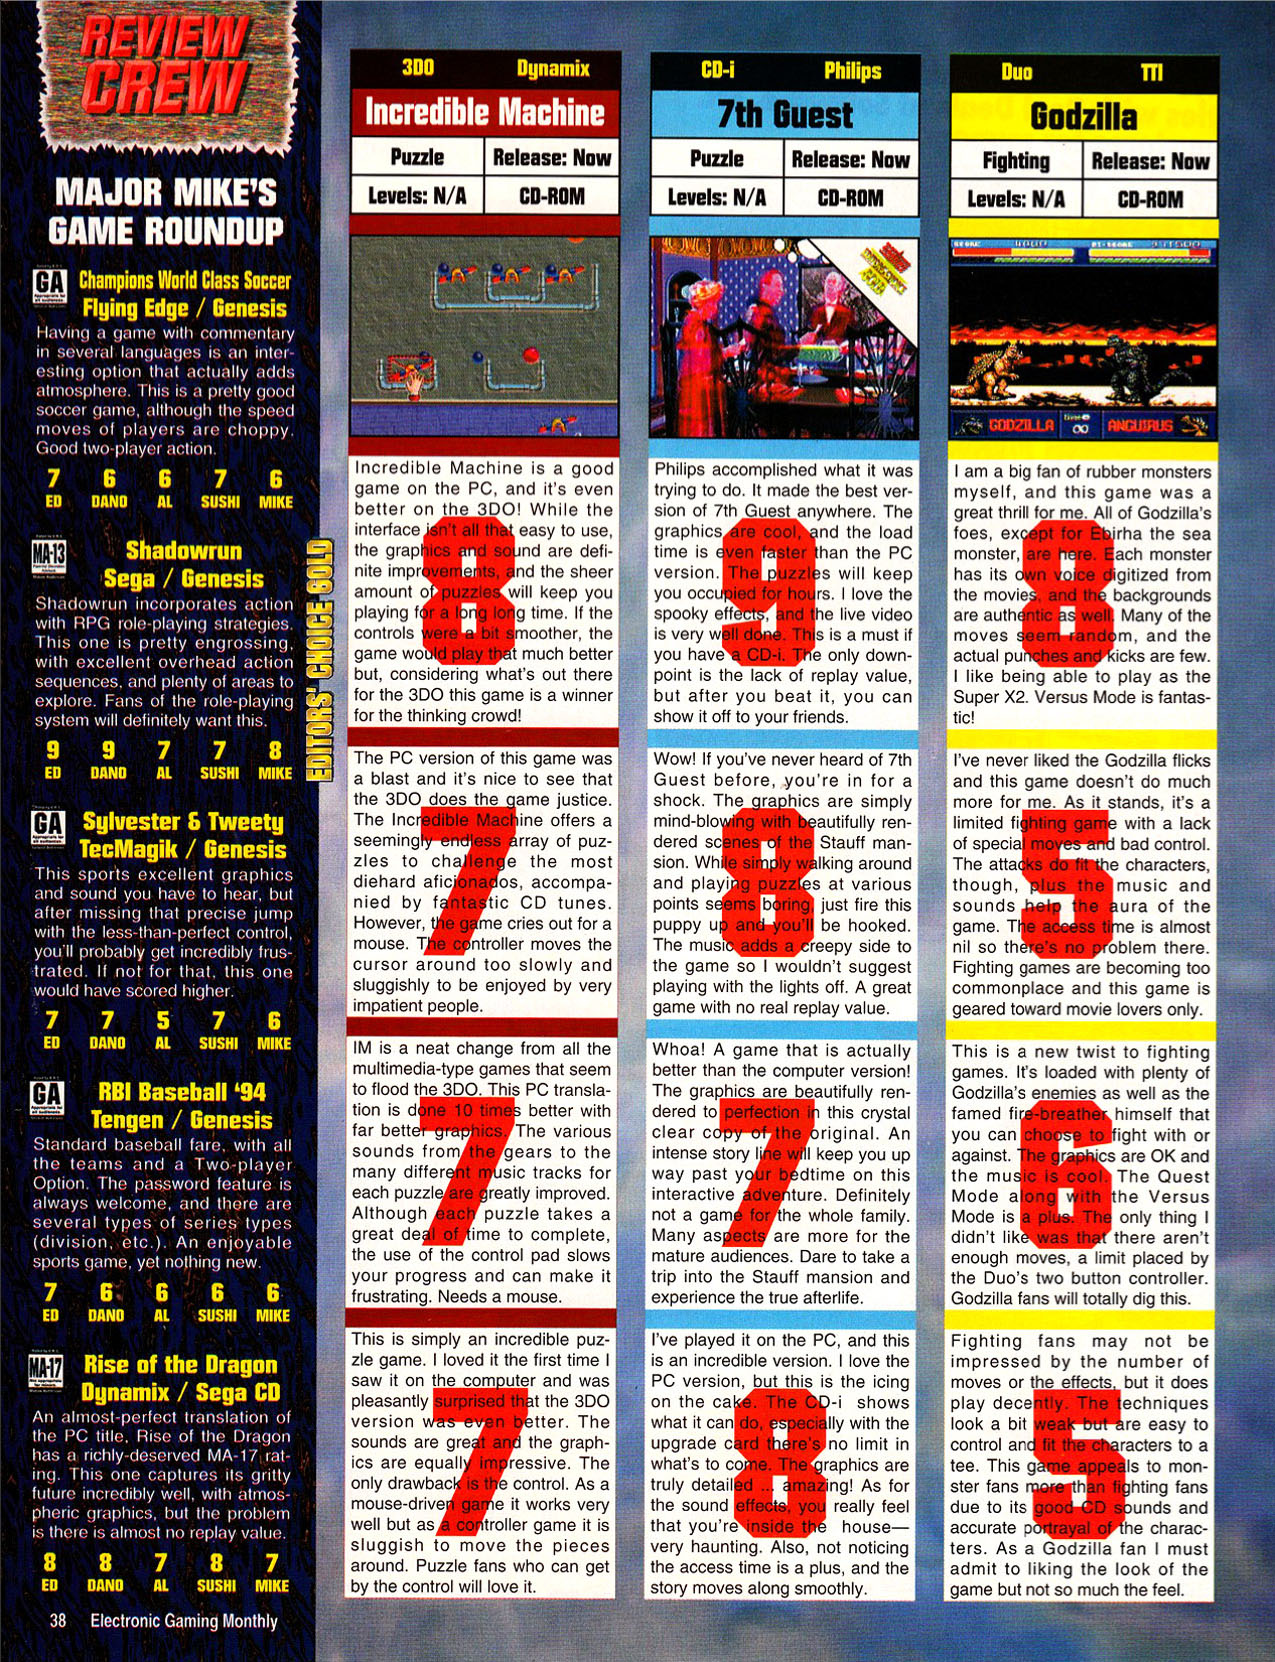 RBI Baseball '94 Review, Electronic Gaming Monthly June 1994 page 38